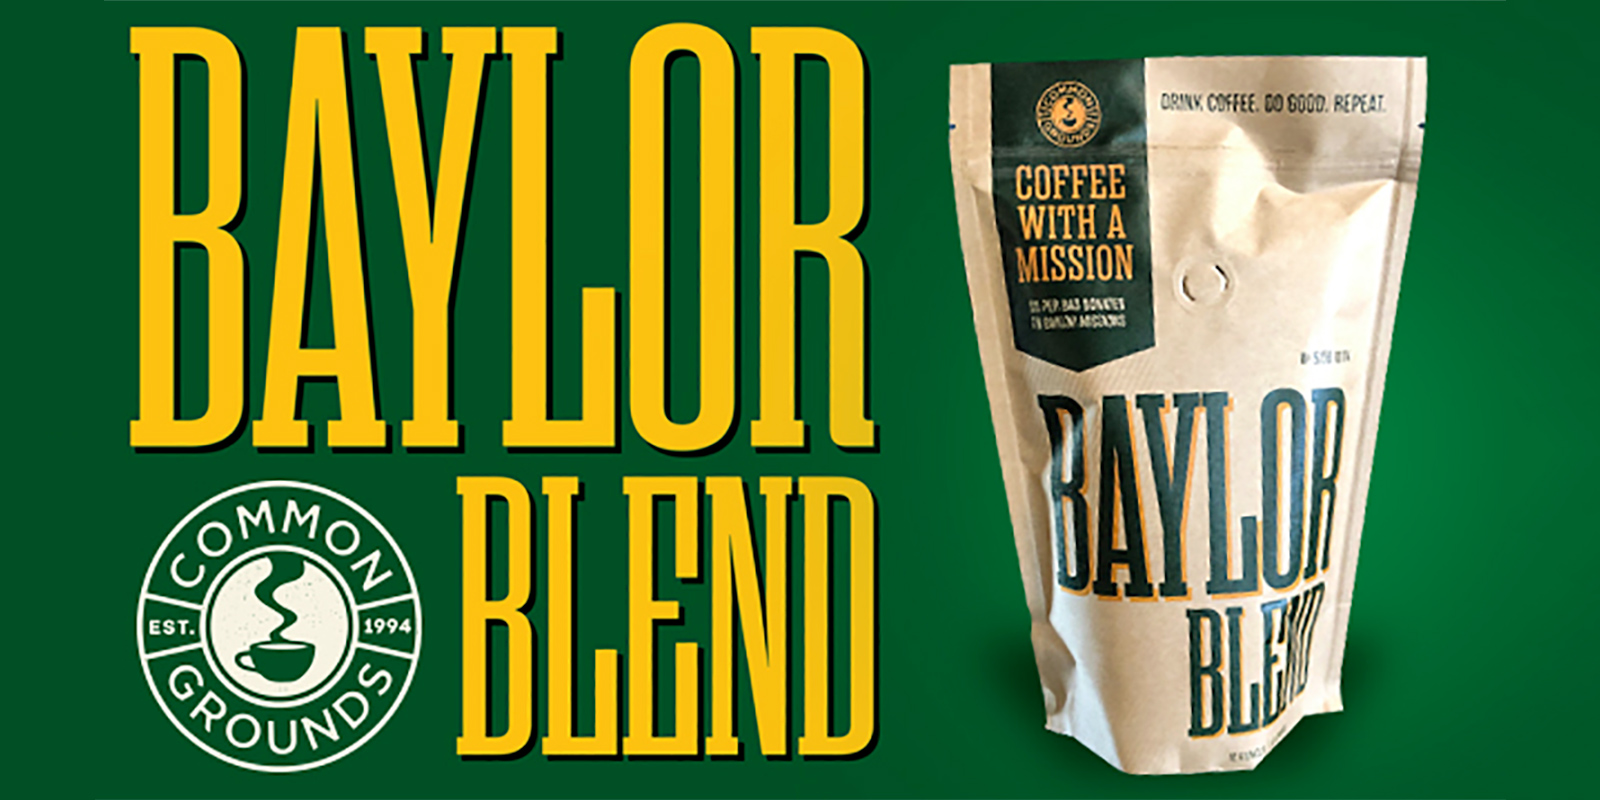 Baylor Blend coffee from Common Grounds